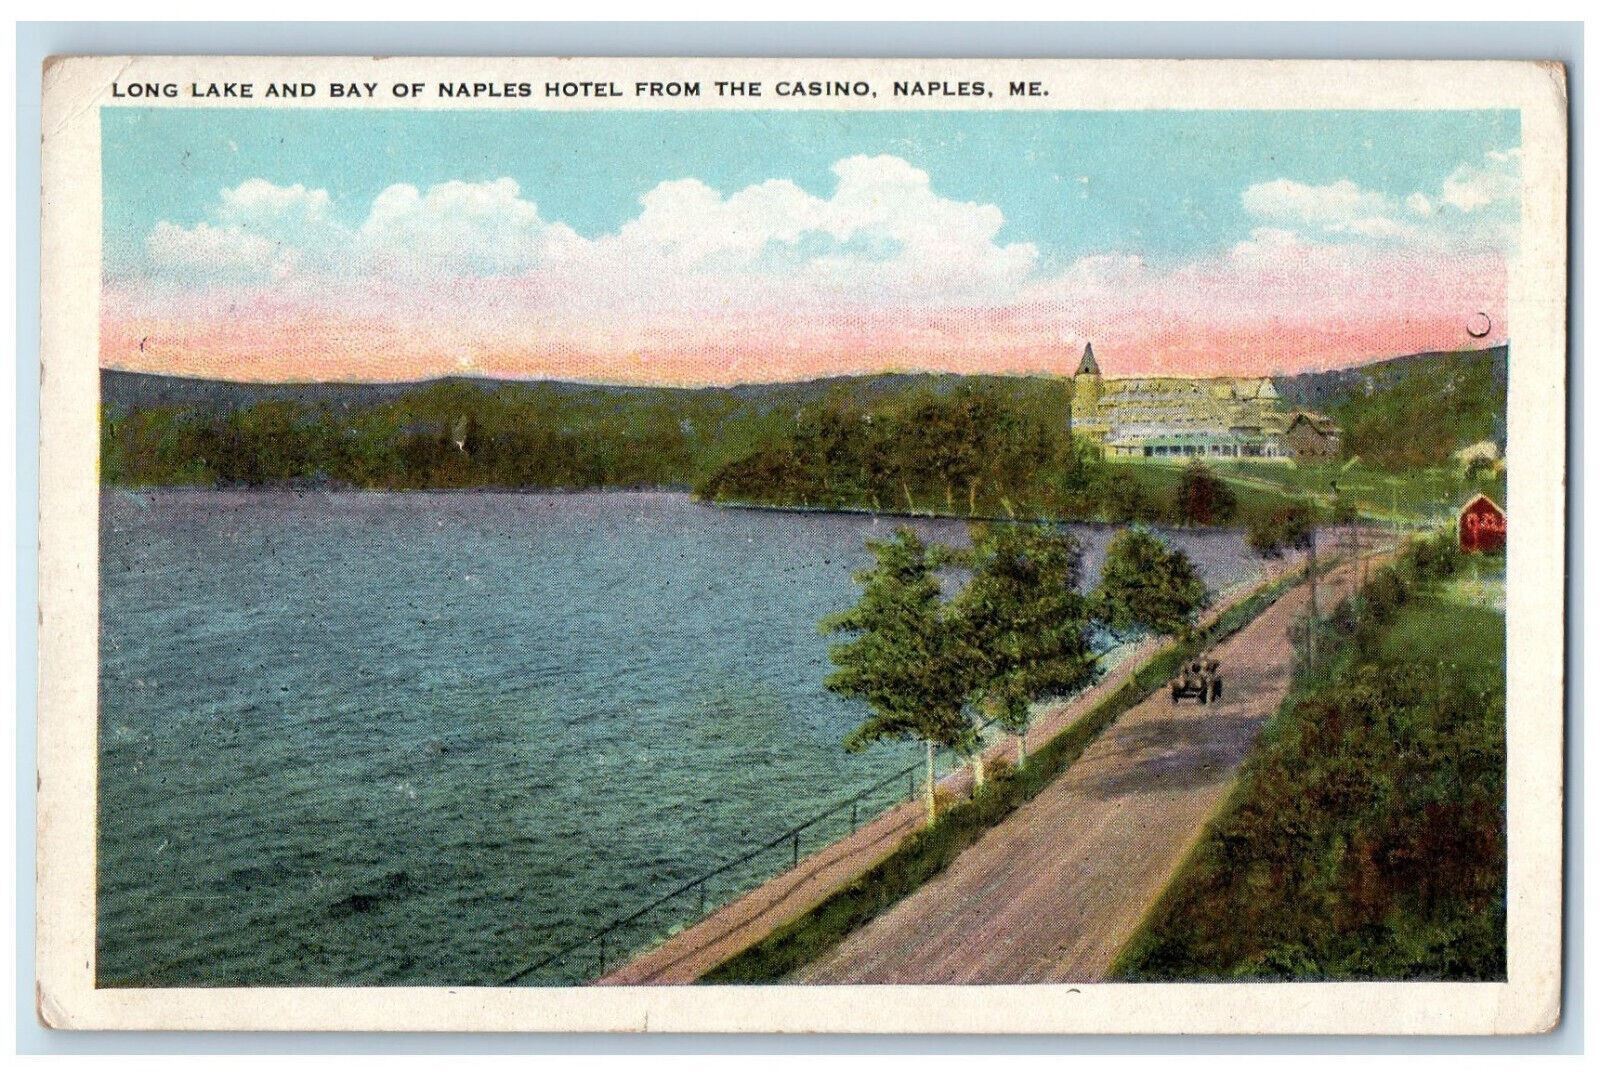 1925 Long Lake and Bay of Naples Hotel from the Casino Naples ME Postcard